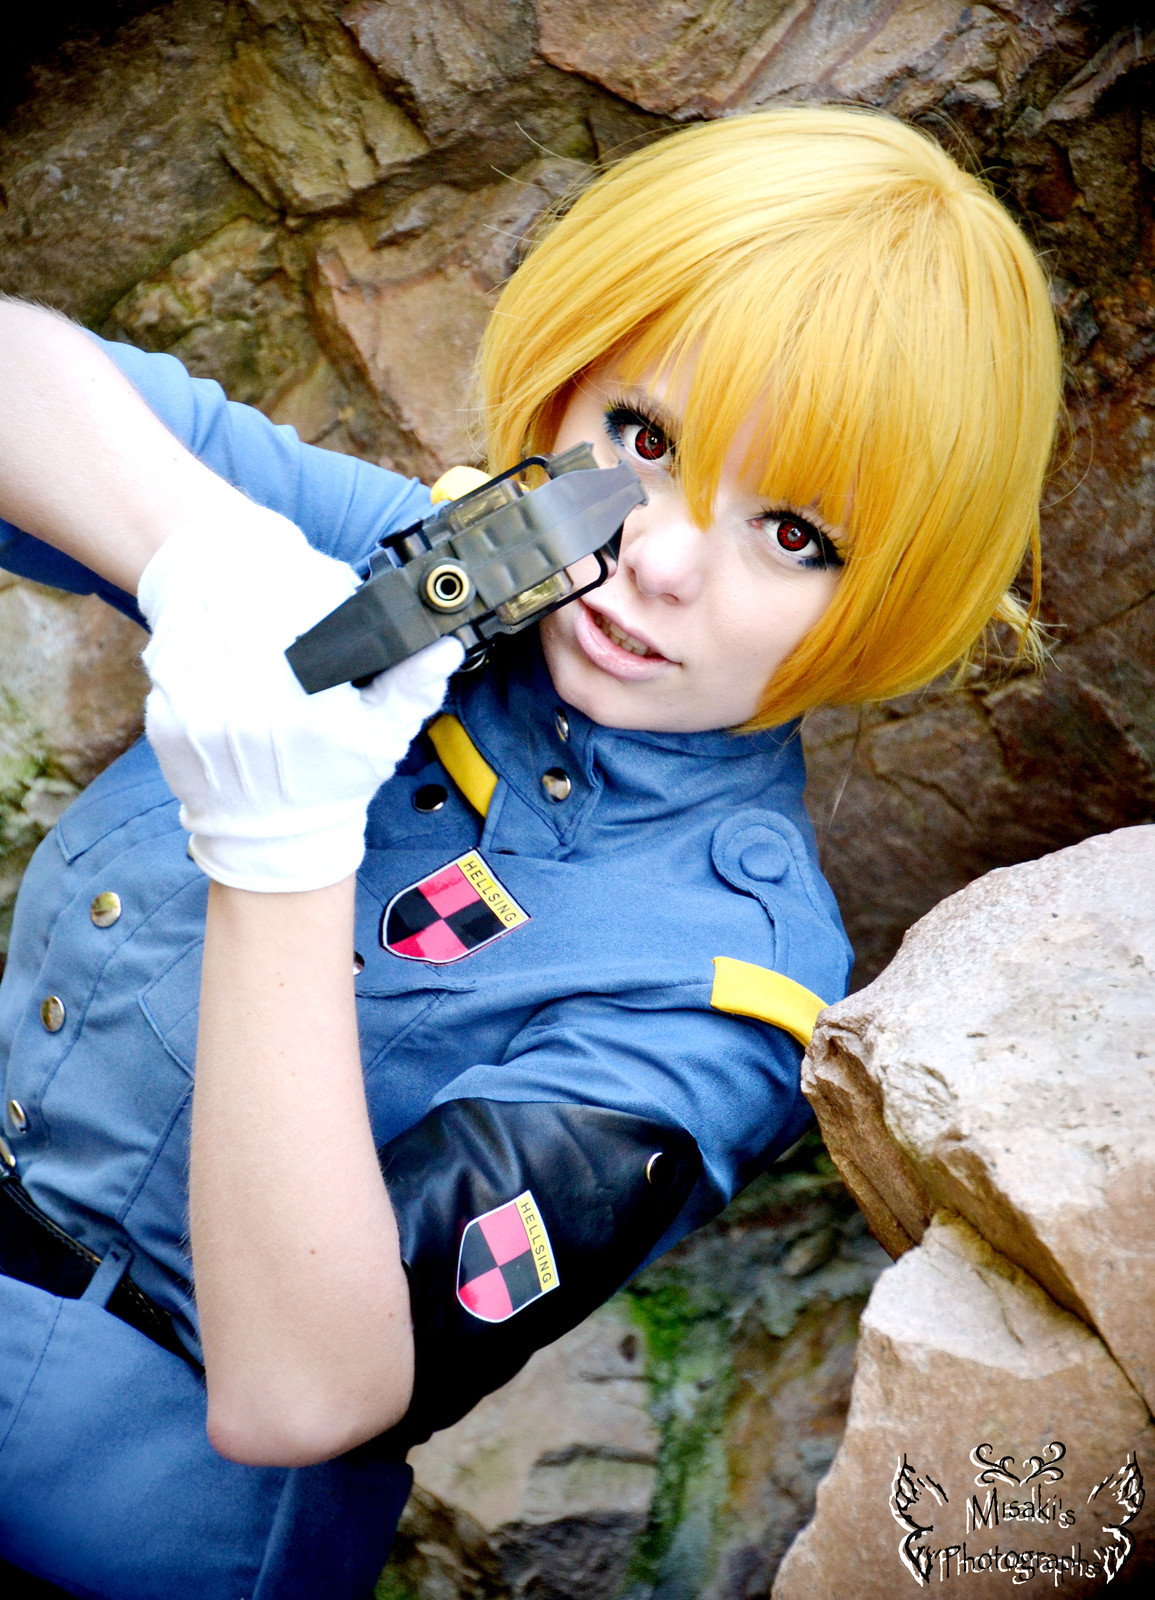 Seras Victoria - Hellsing / Cosplayer GeniMonster / Photographer TaigaArts - CC-BY-NC